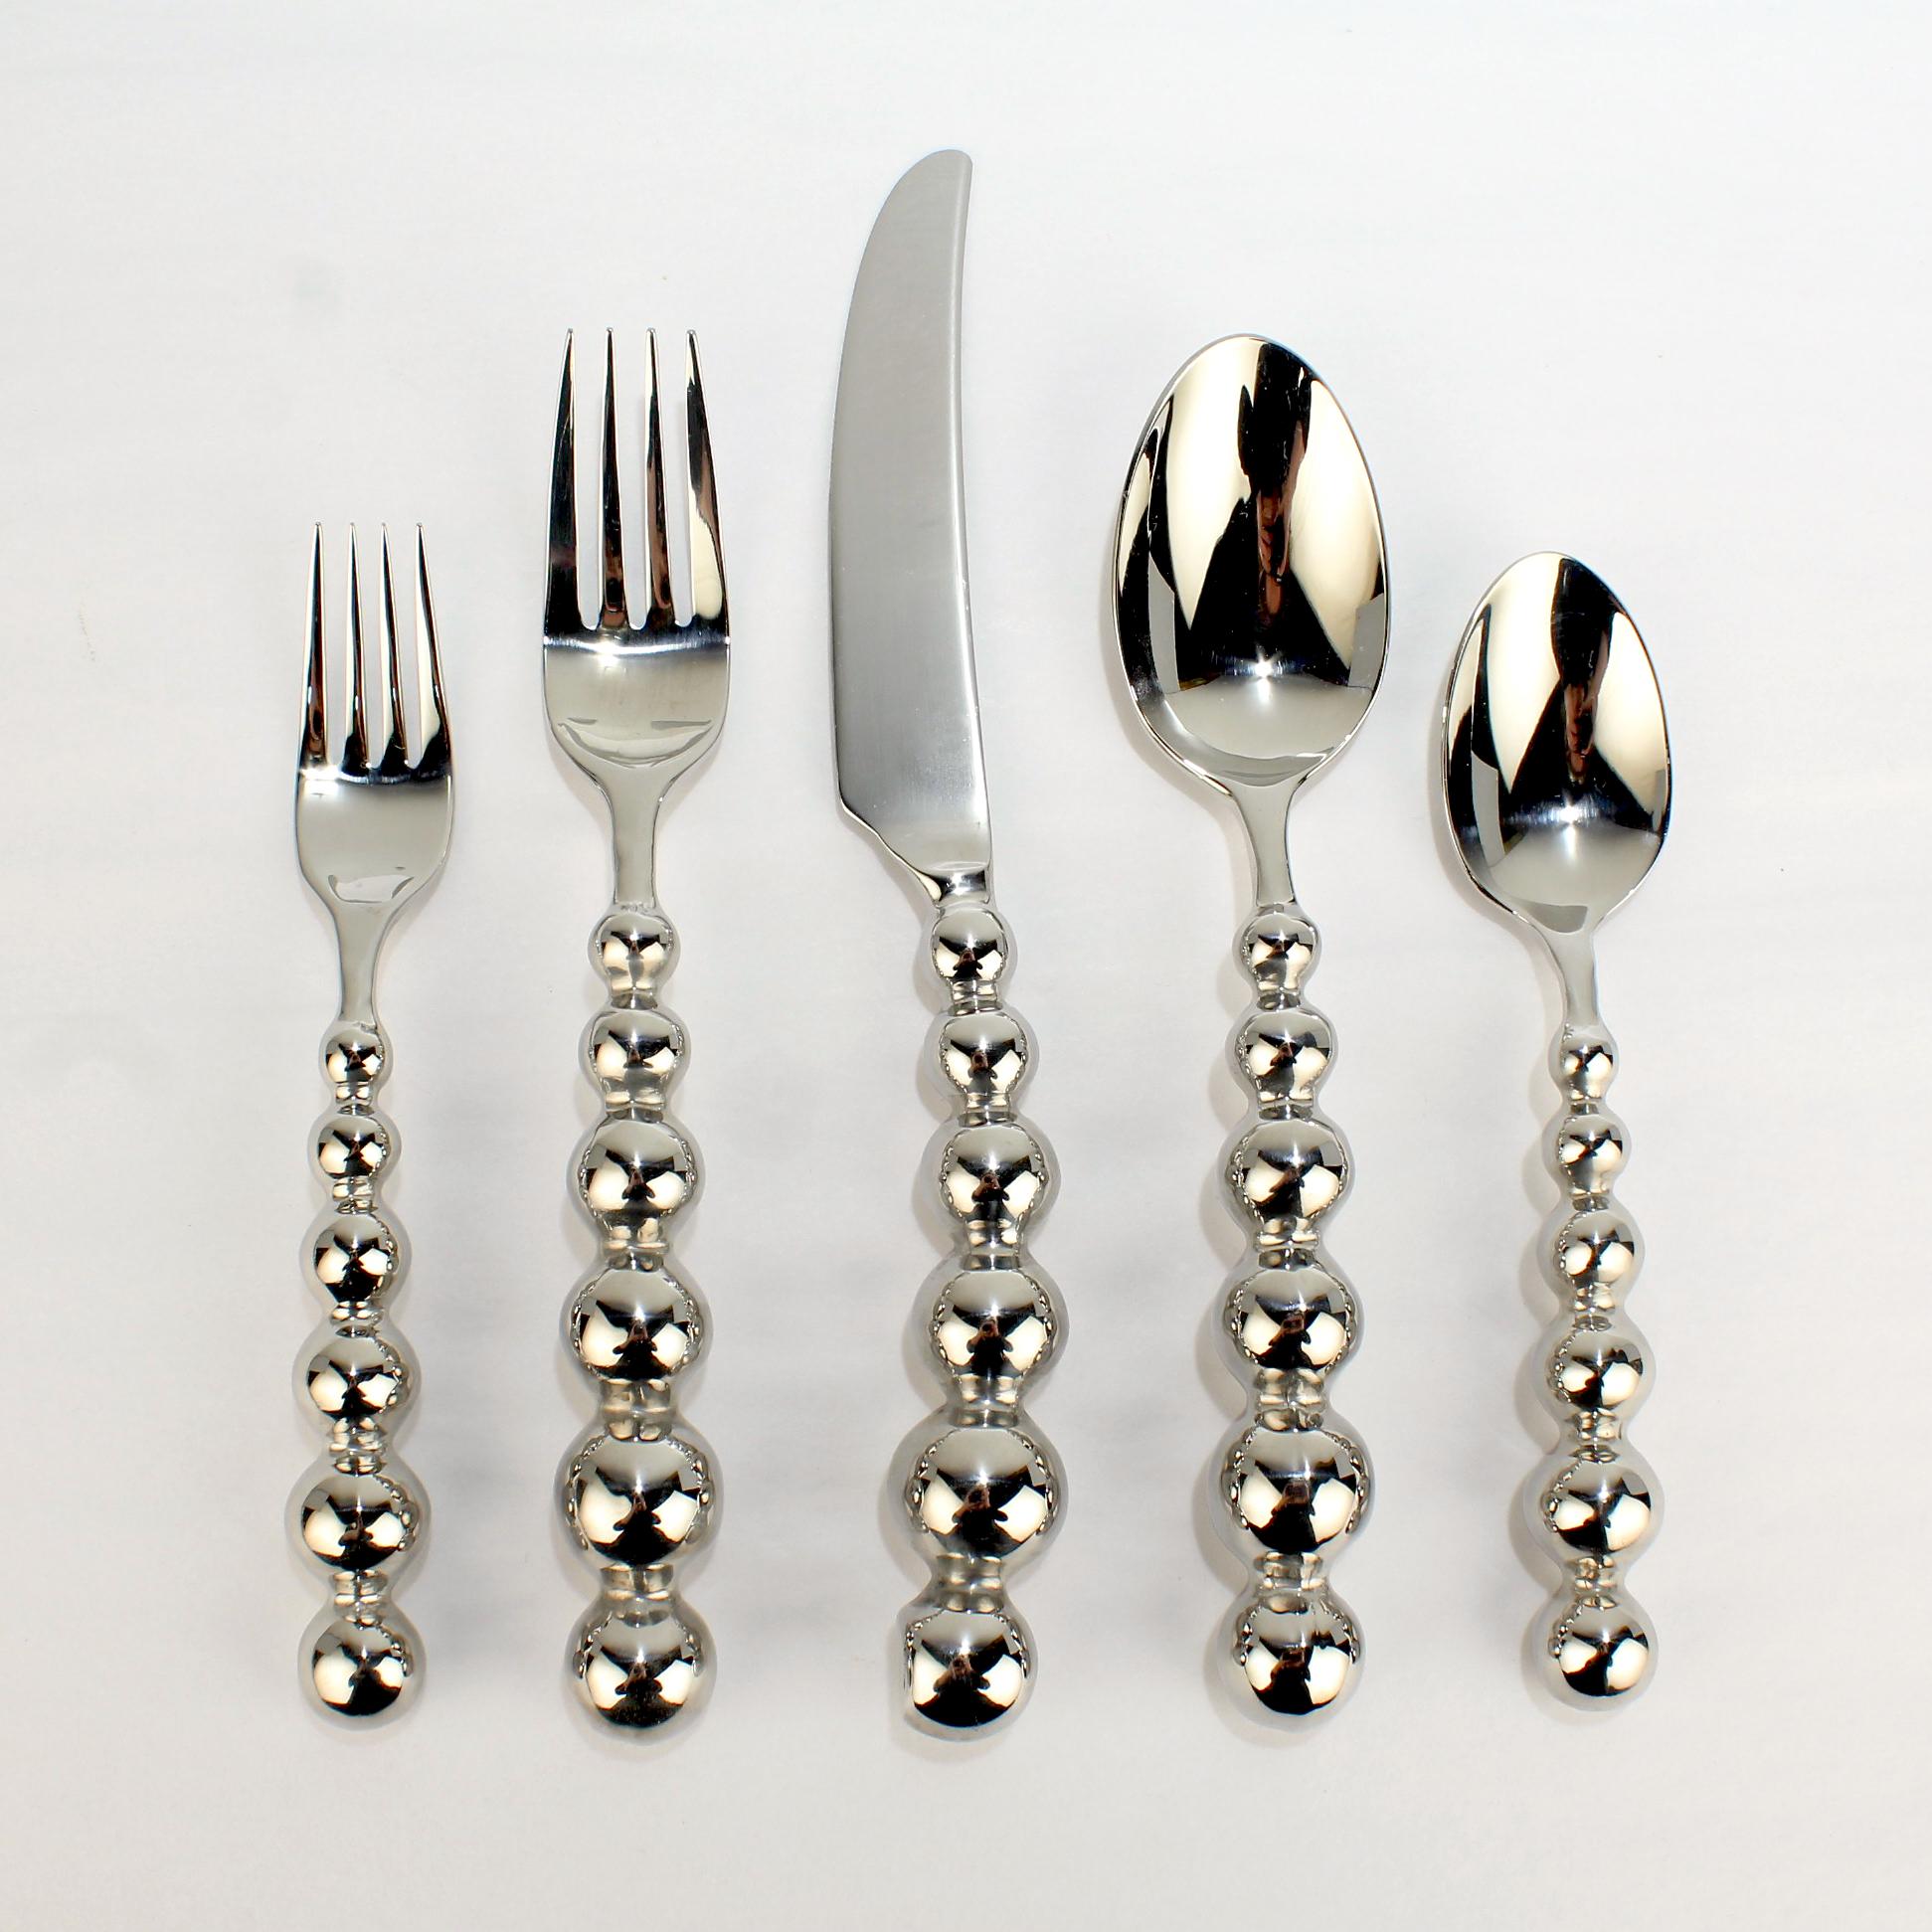 Offered here for your consideration is a far-out set of flatware by Cambridge in stainless steel.

This pattern called 'Galaxy' appears to have been short-lived. 

We can find very little about the pattern from this large international flatware